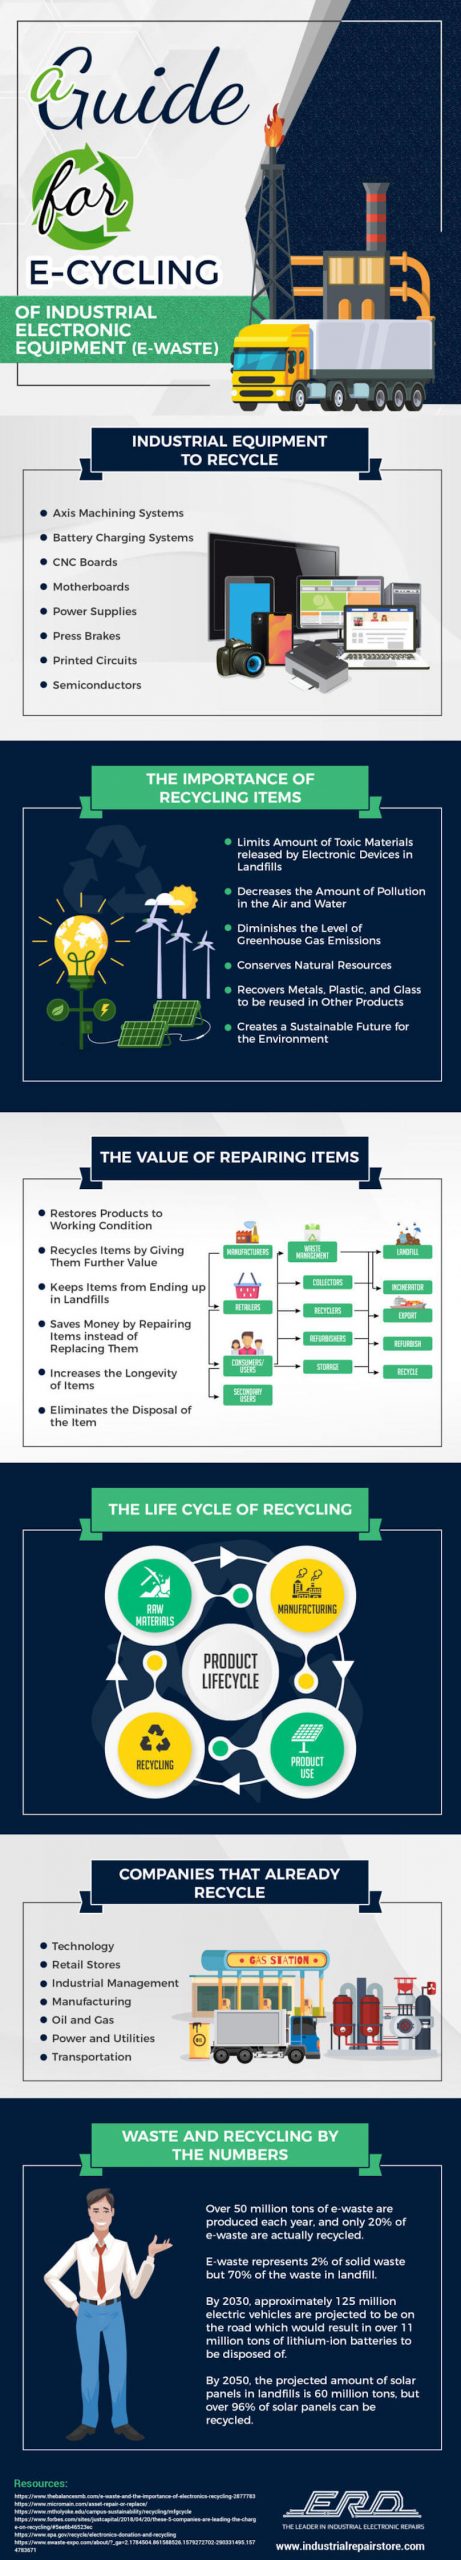 a guide for recycling electronics infographic